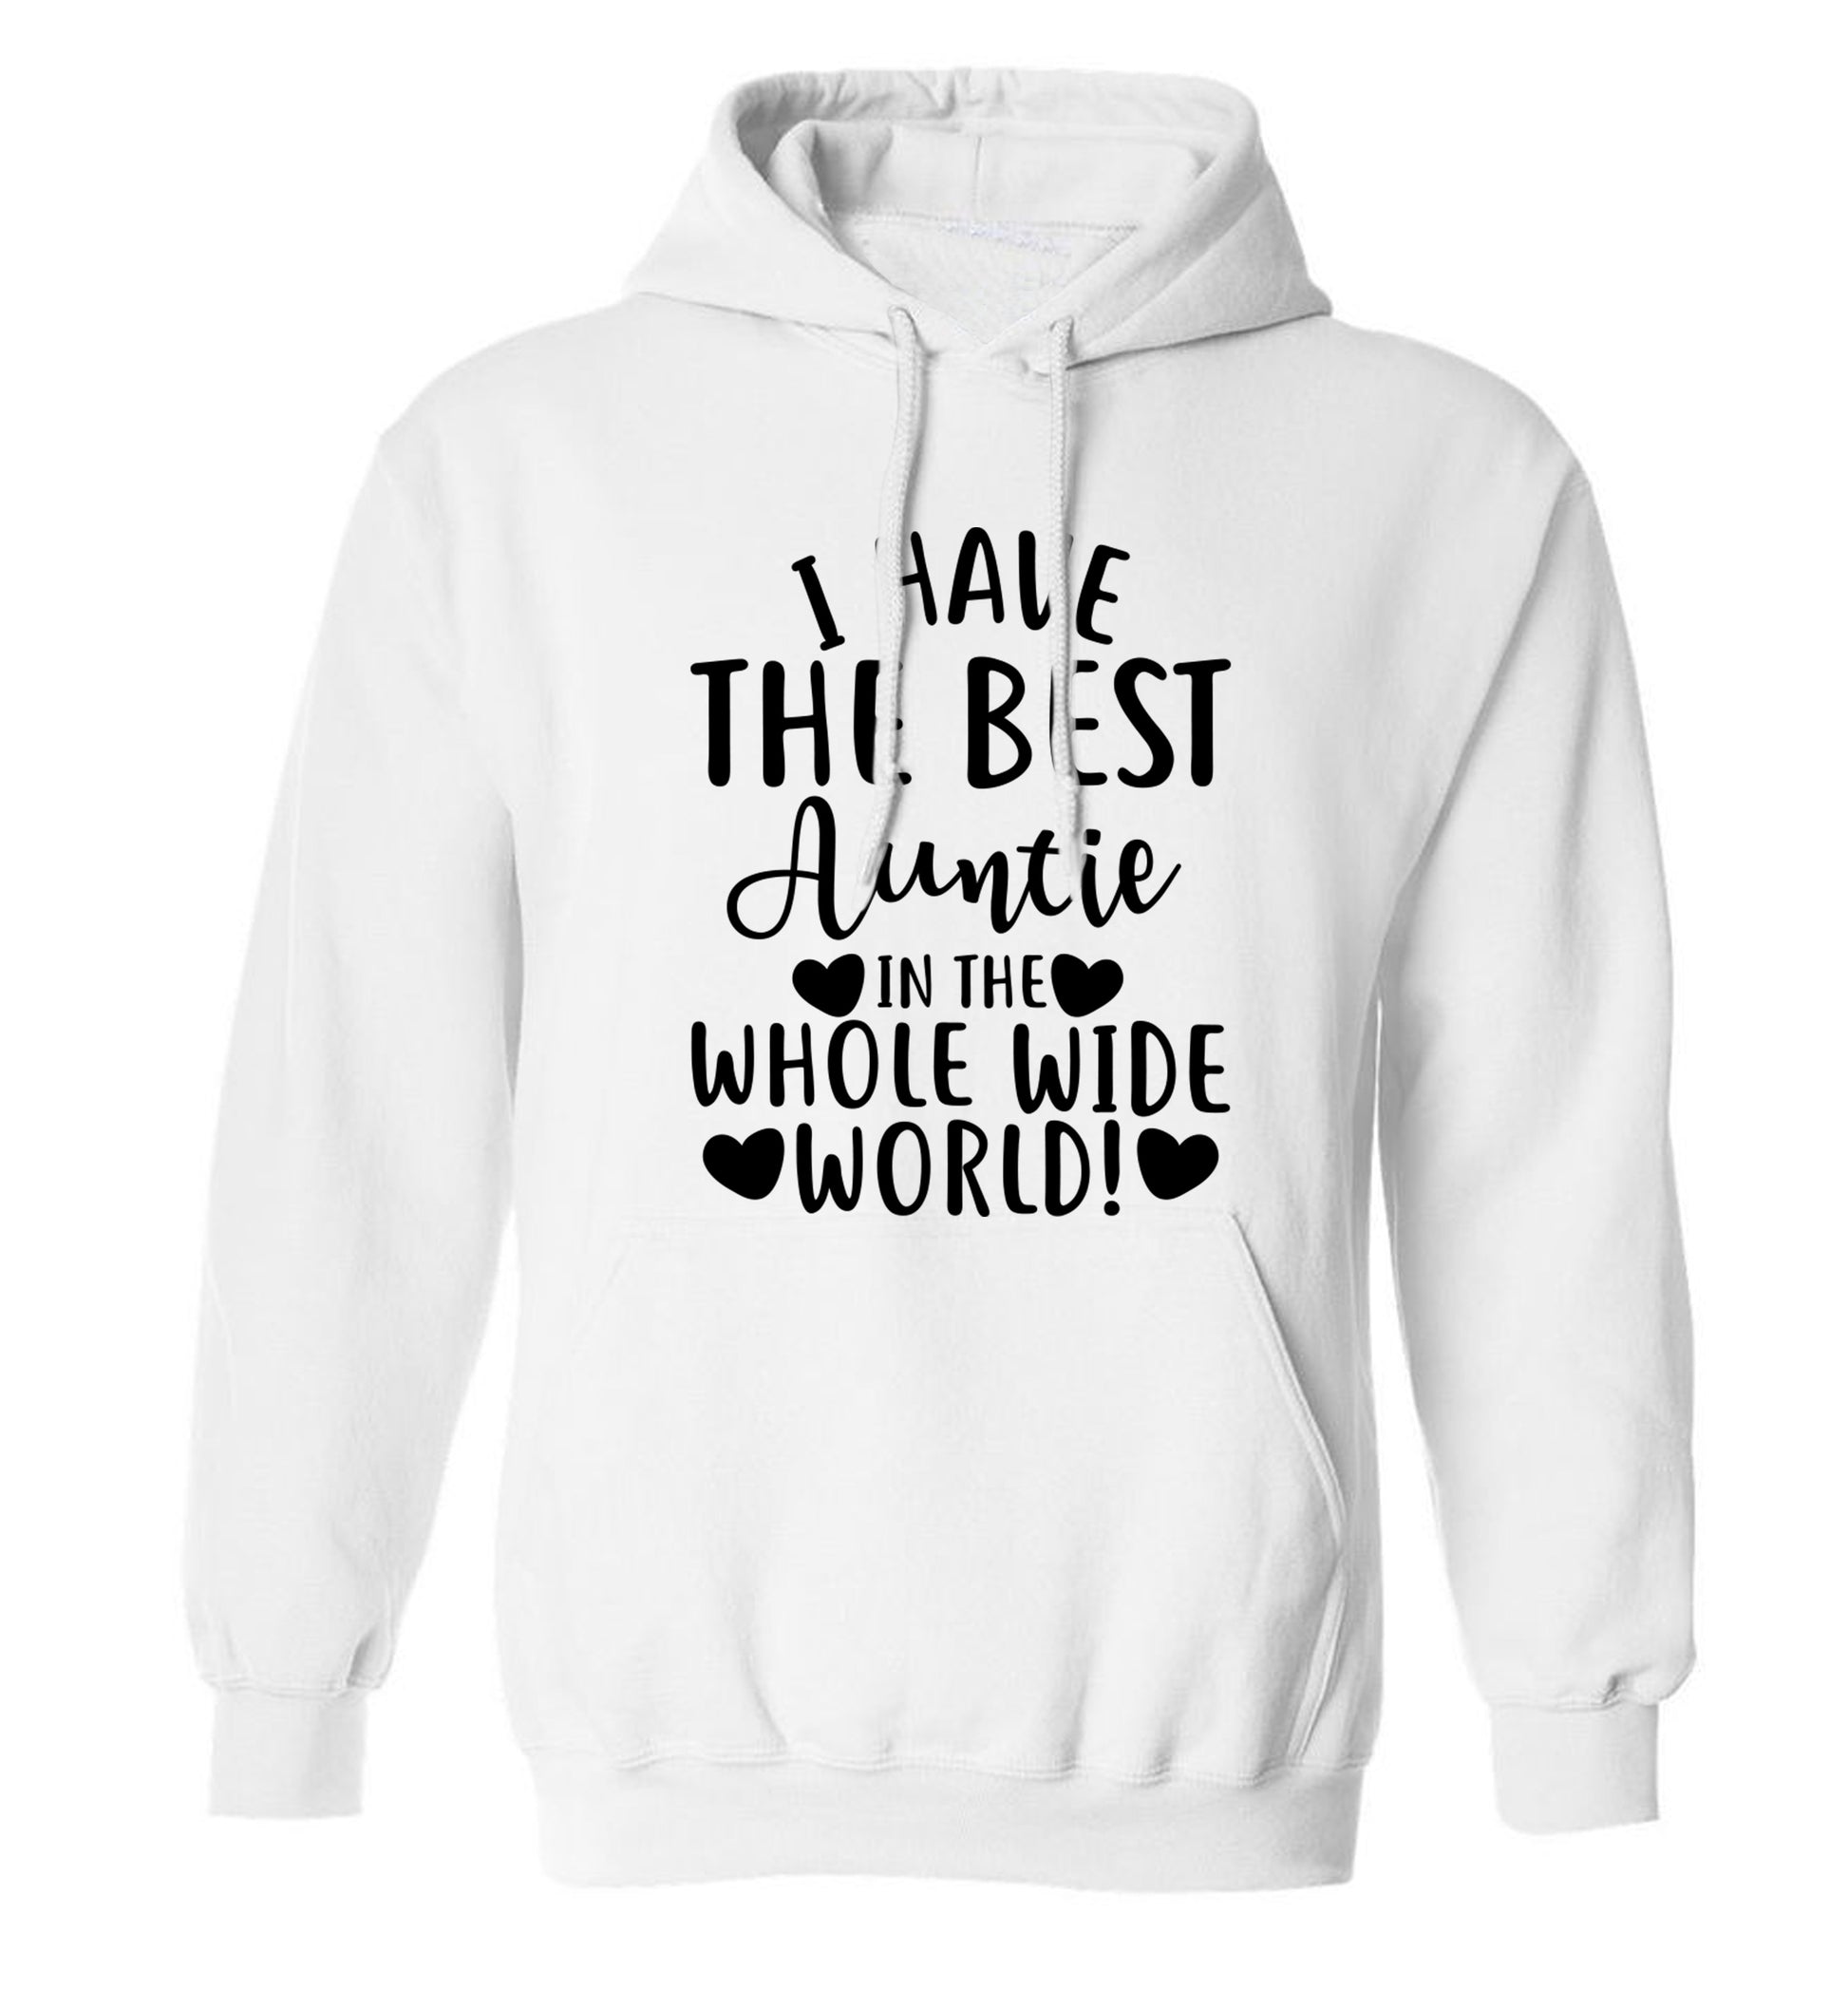 I have the best auntie in the whole wide world! adults unisex white hoodie 2XL